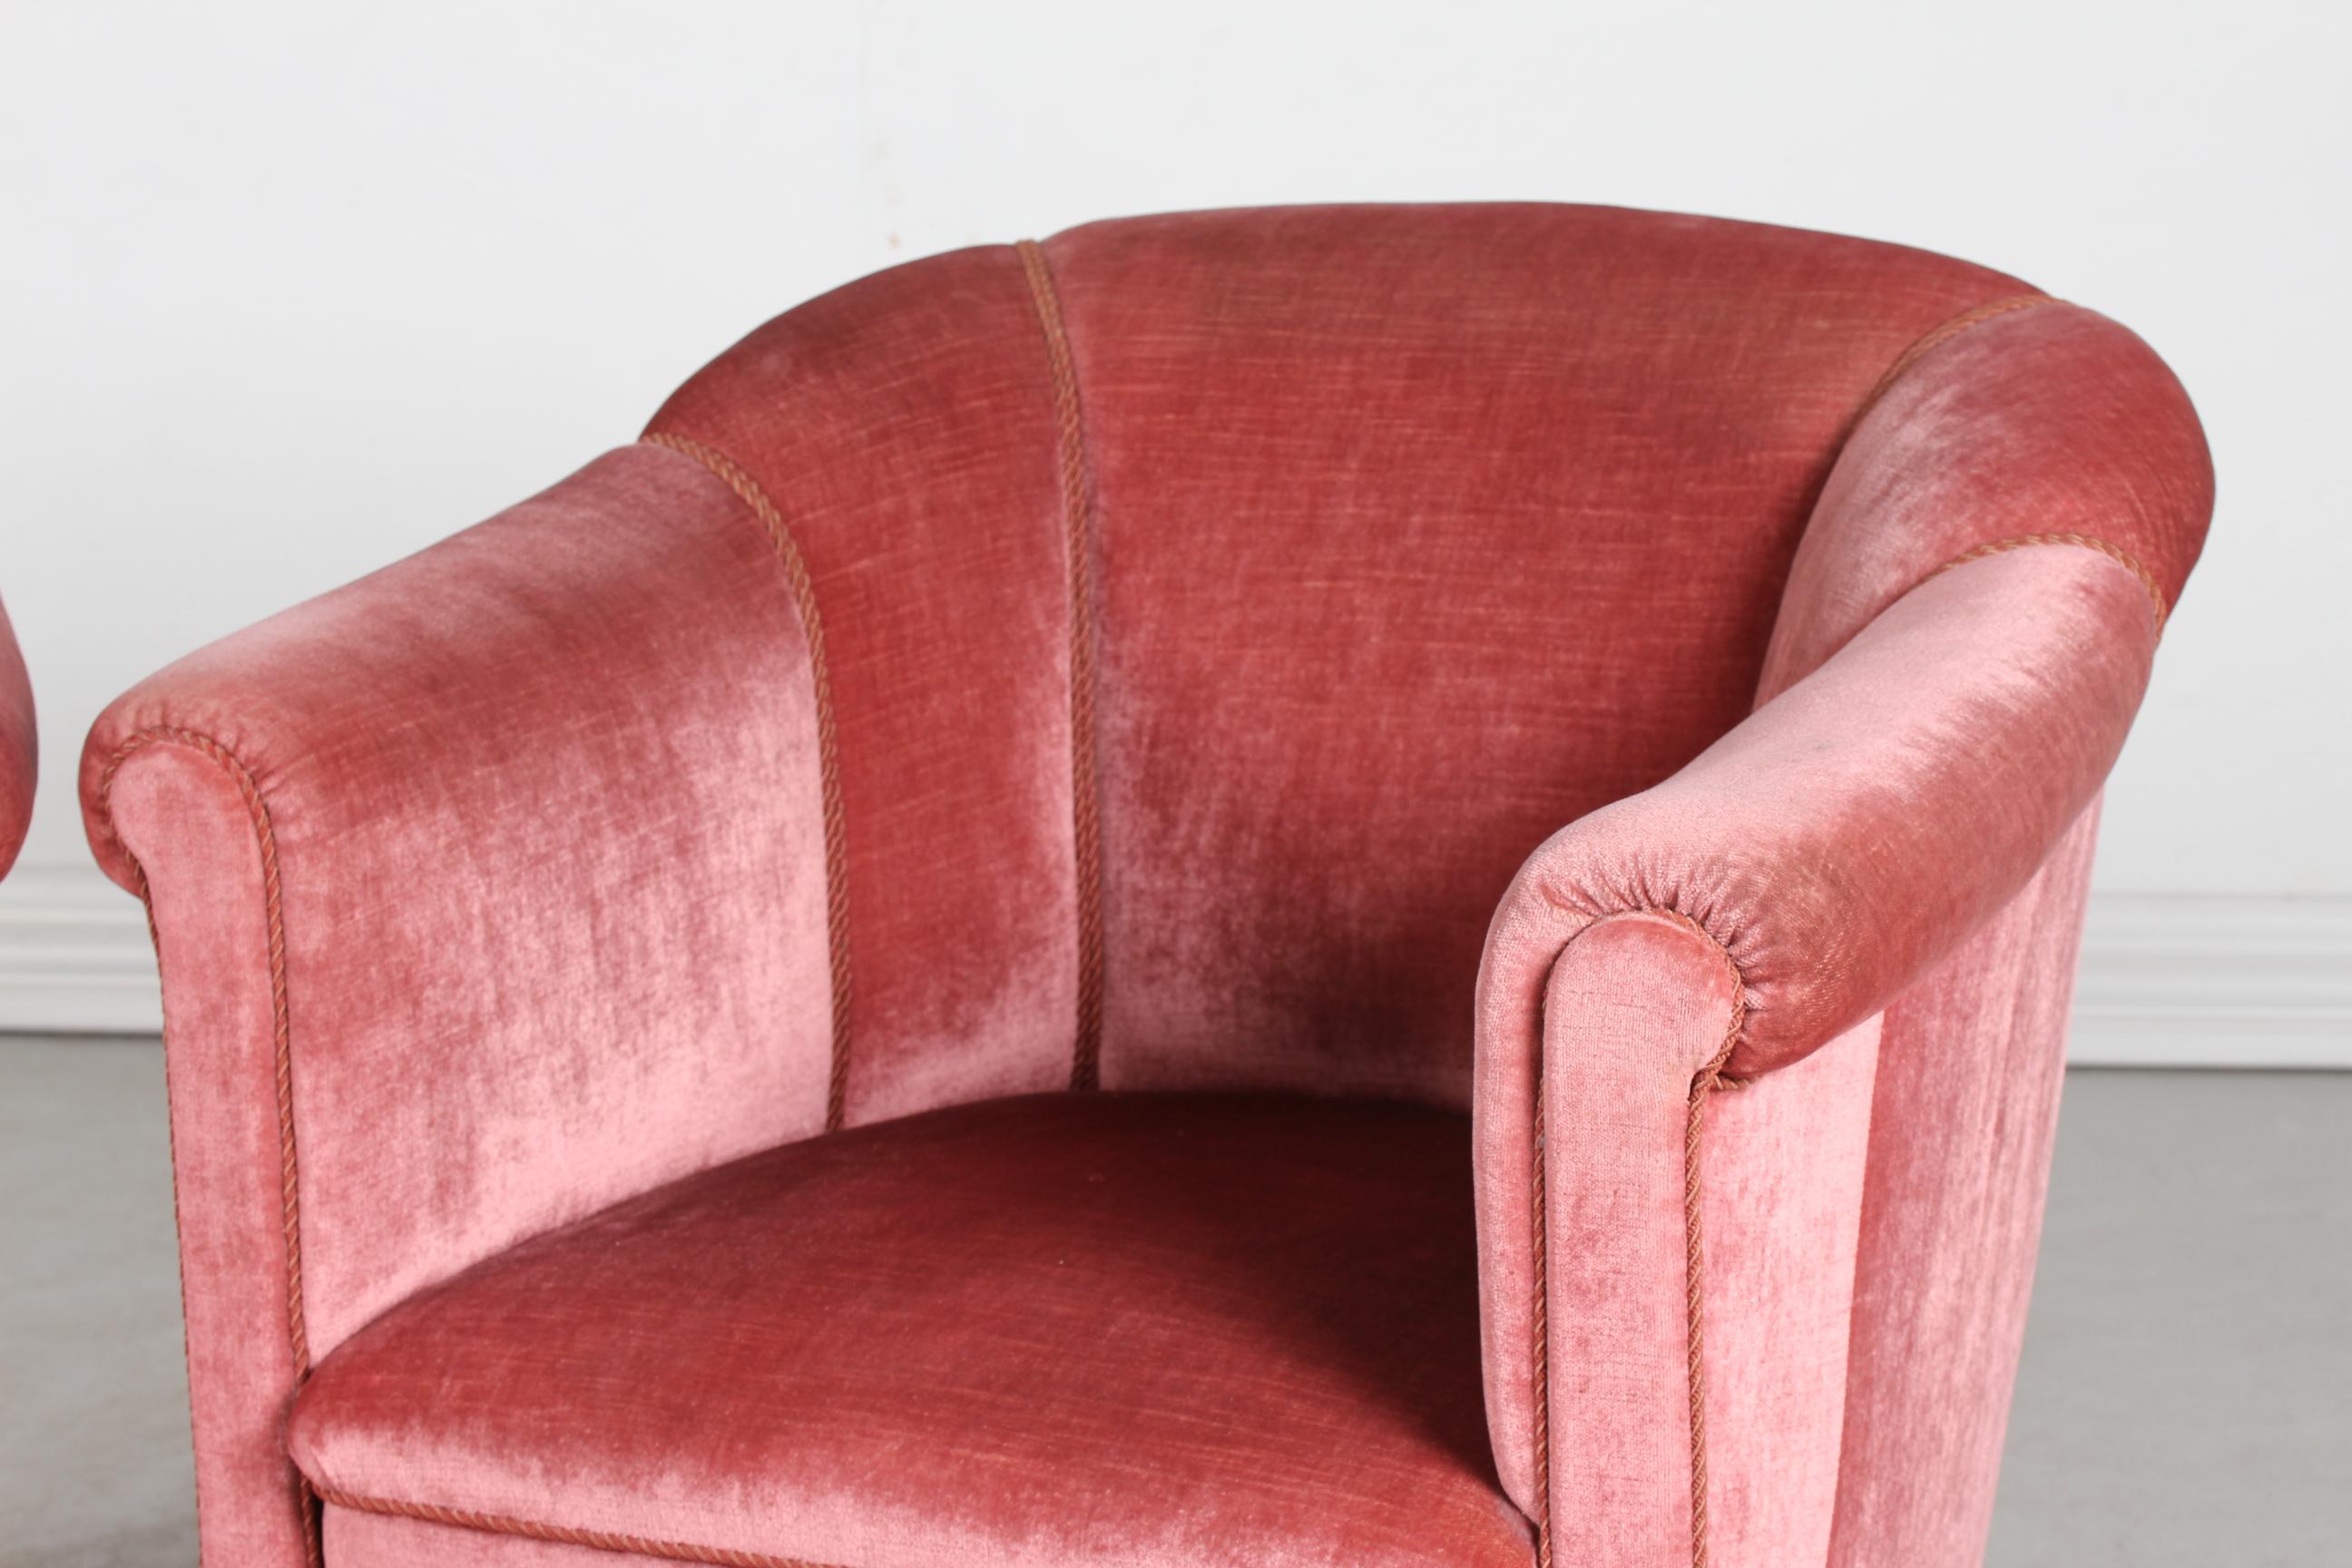 Early 20th Century Pair of Old Danish Chesterfield Club Lounge Chairs Upholstered Pink Velvet 1920s